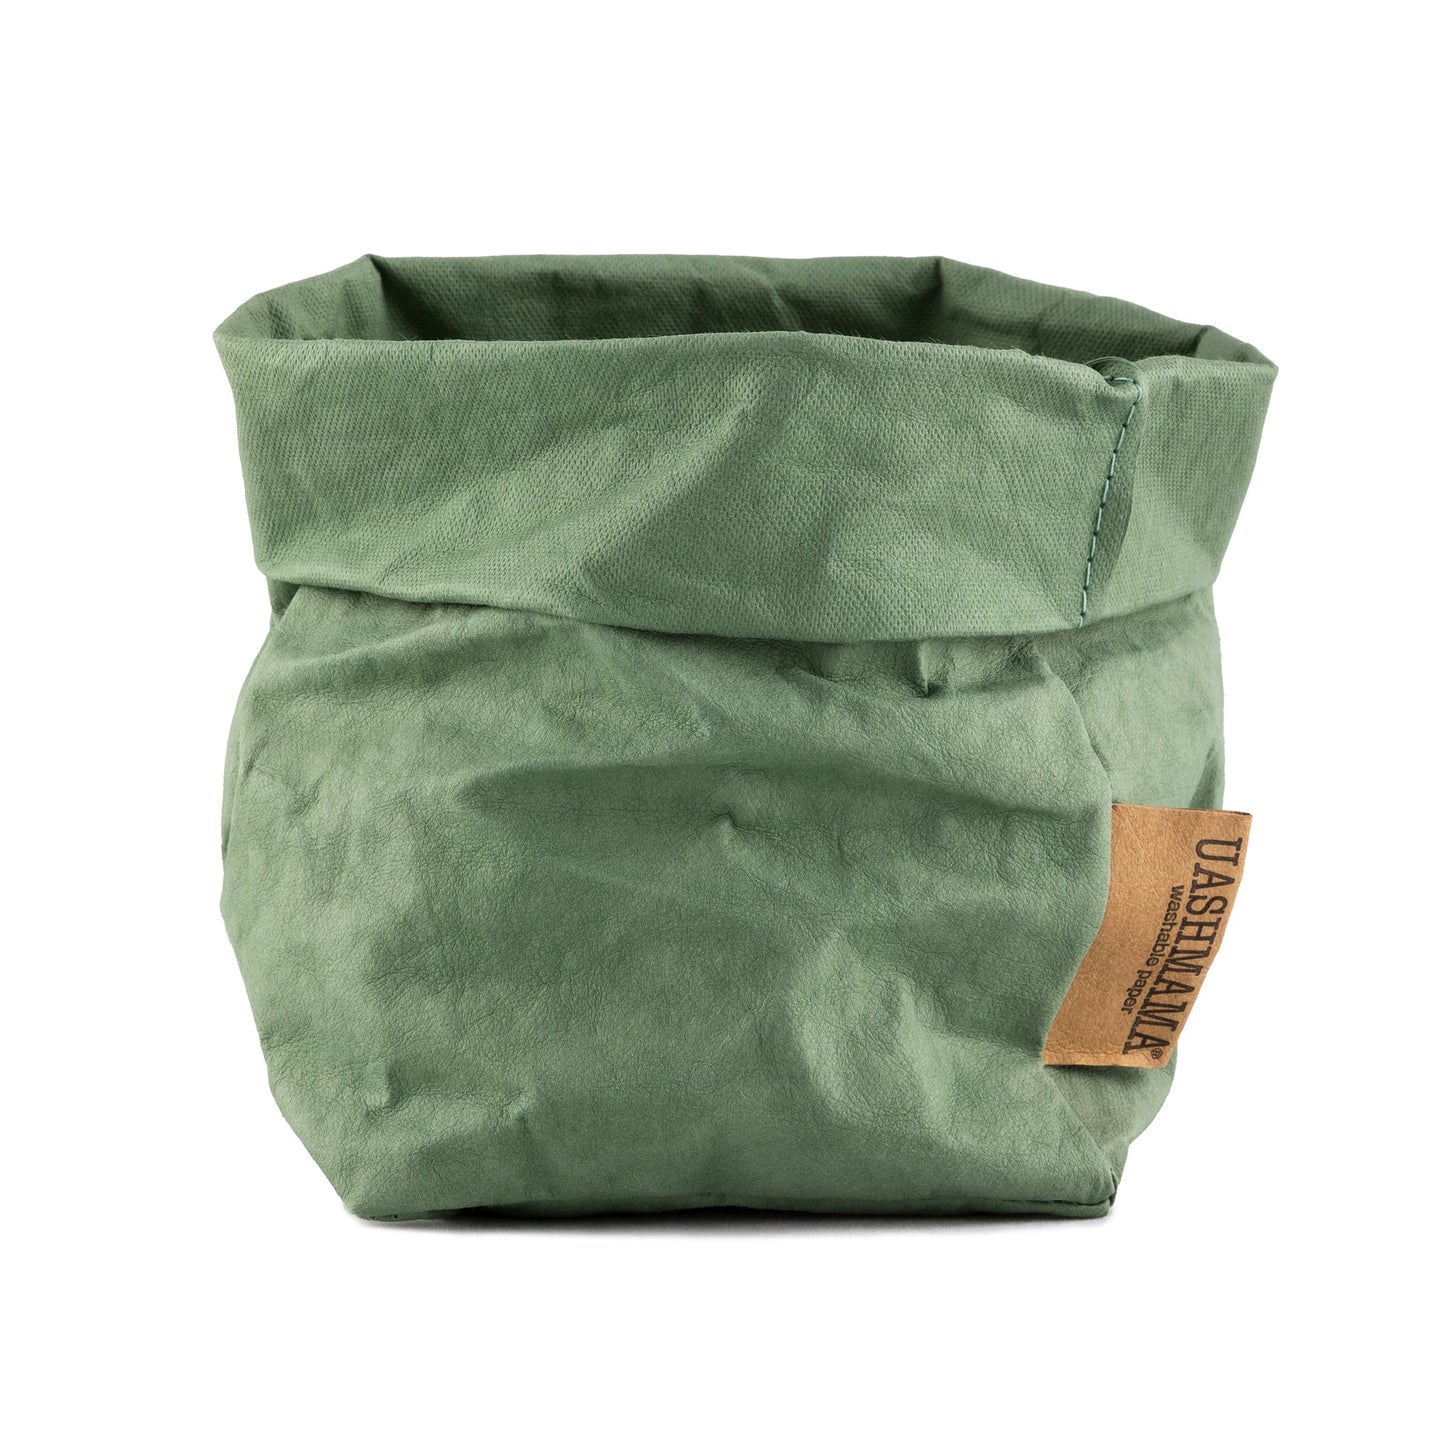 A washable paper bag is shown. The bag is rolled down at the top and features a UASHMAMA logo label on the bottom left corner. The bag pictured is the small size in green.